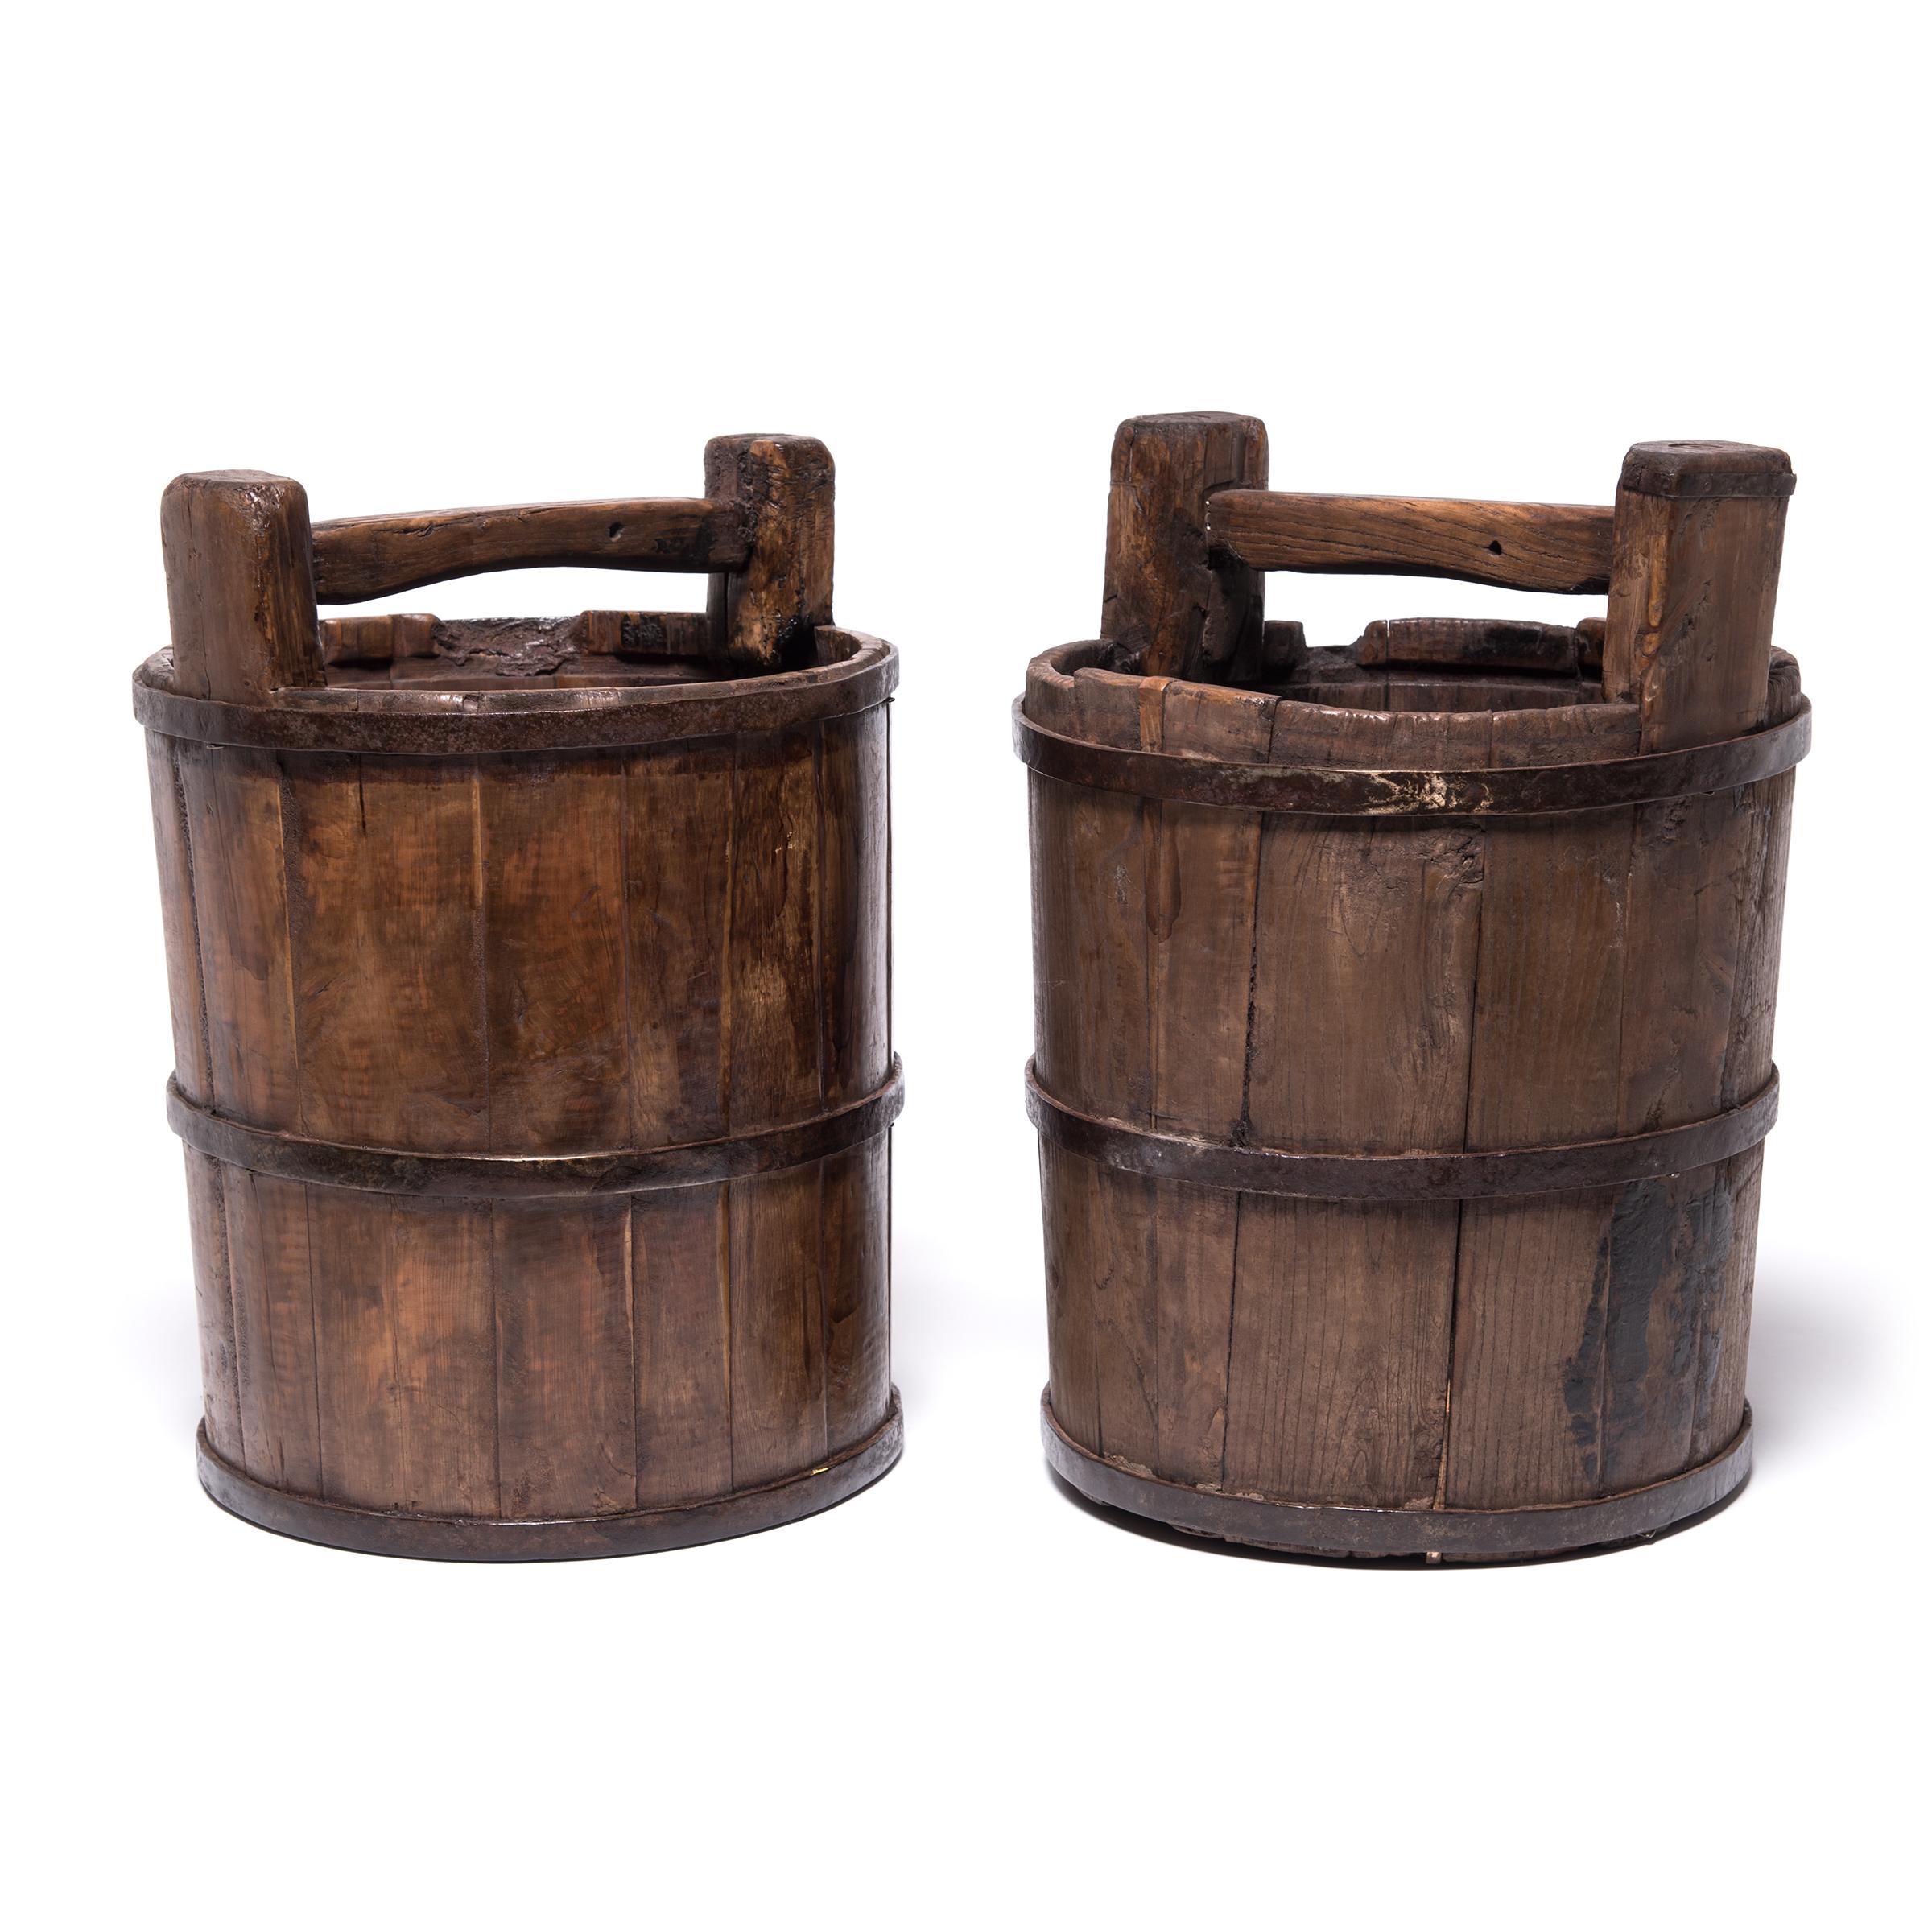 Early 20th Century Chinese Well Bucket 1